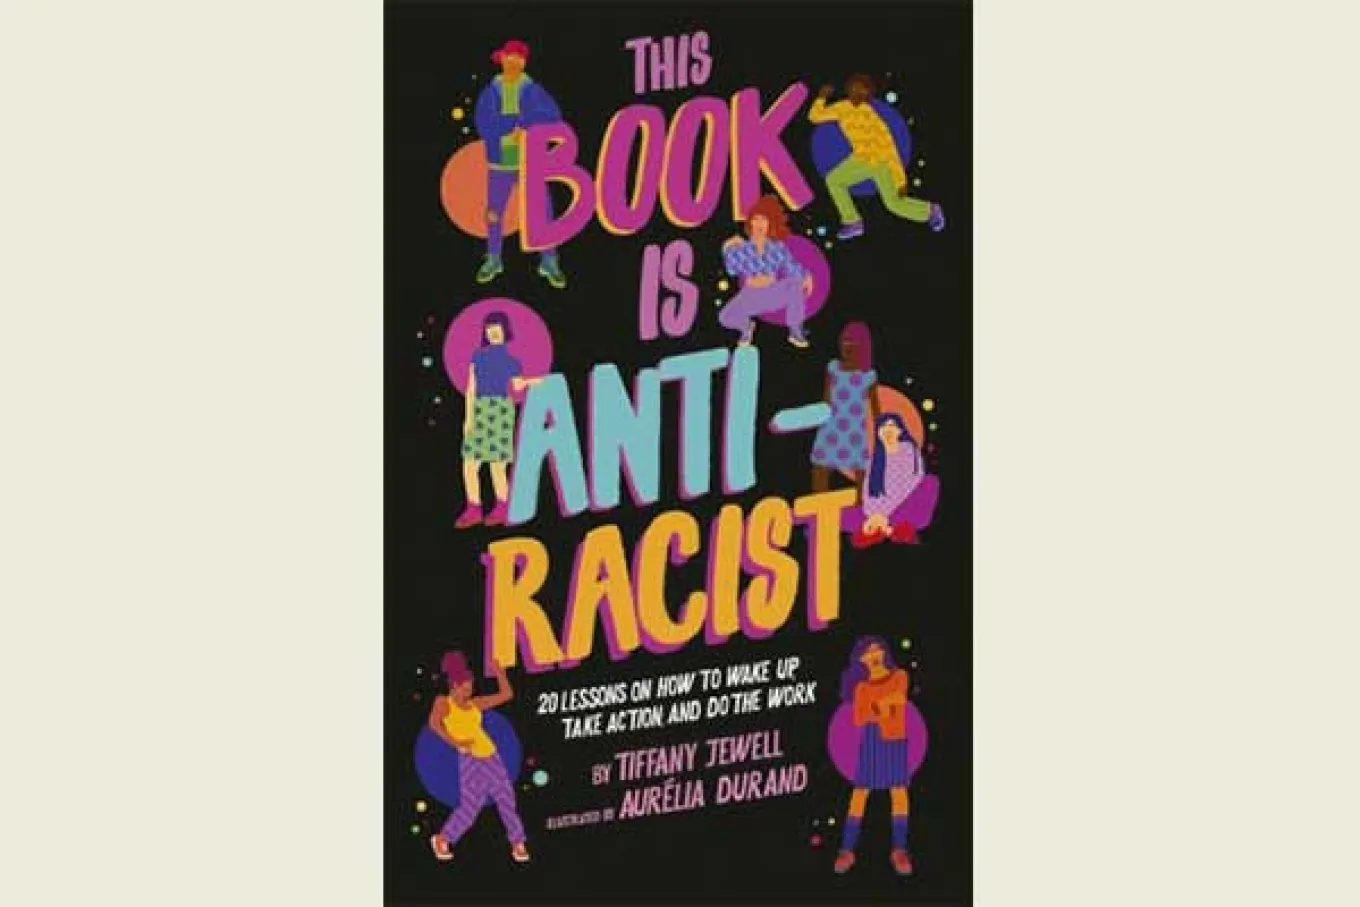 Tiffany Jewell, This Book Is Anti-Racist